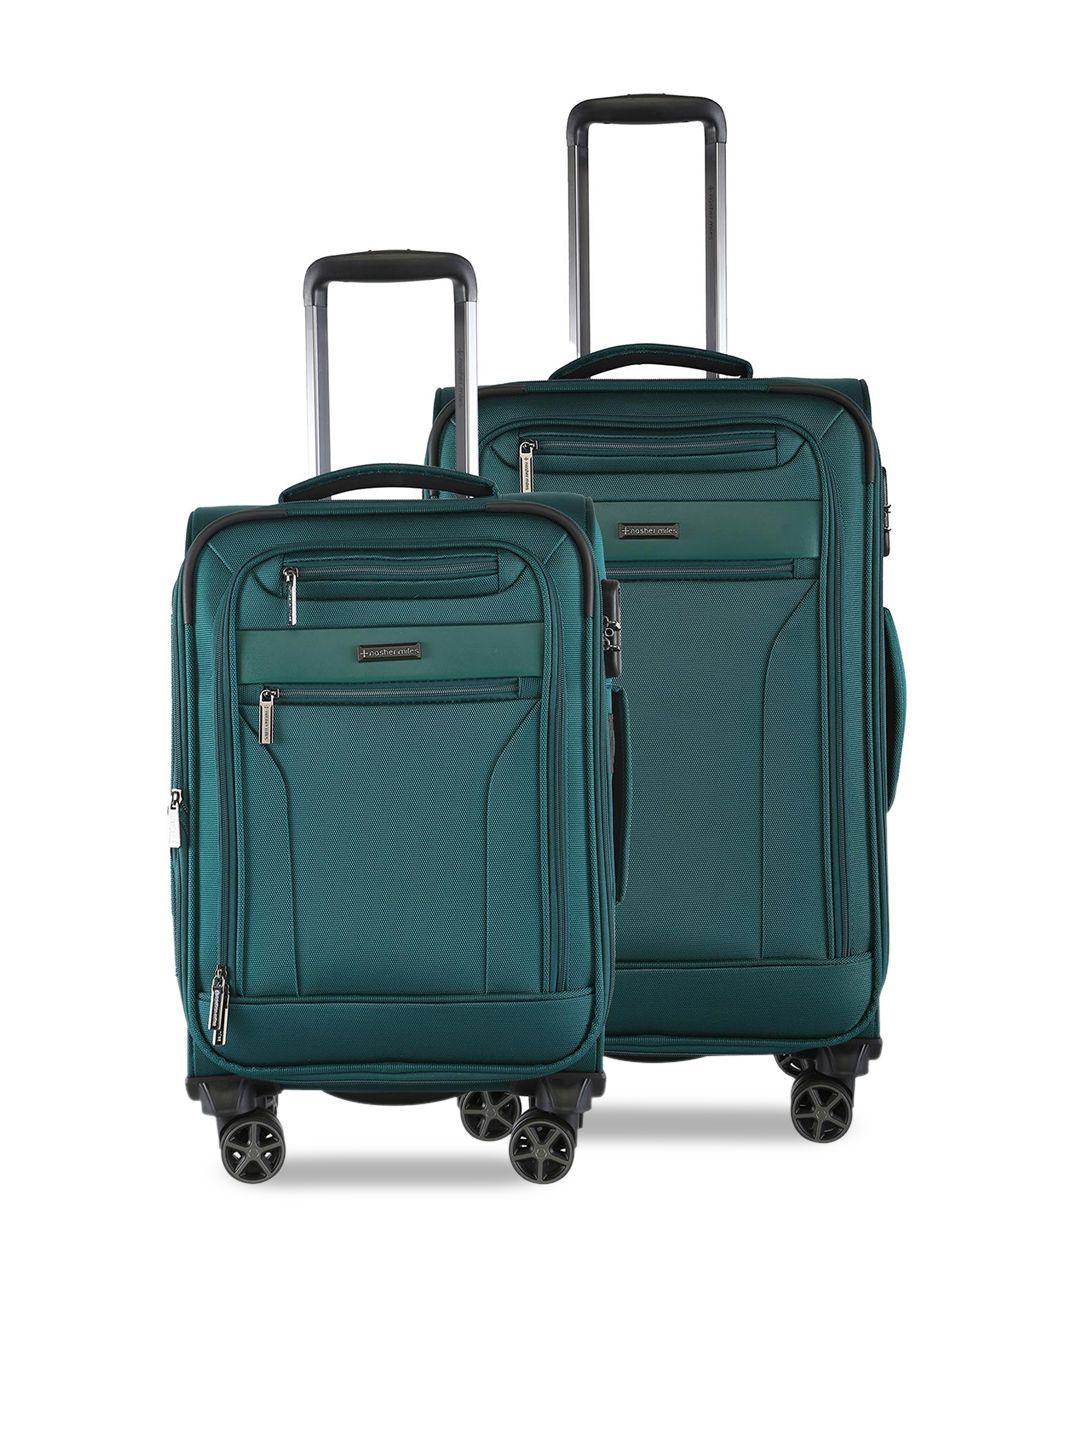 nasher miles set of 2 soft-sided trolley suitcases